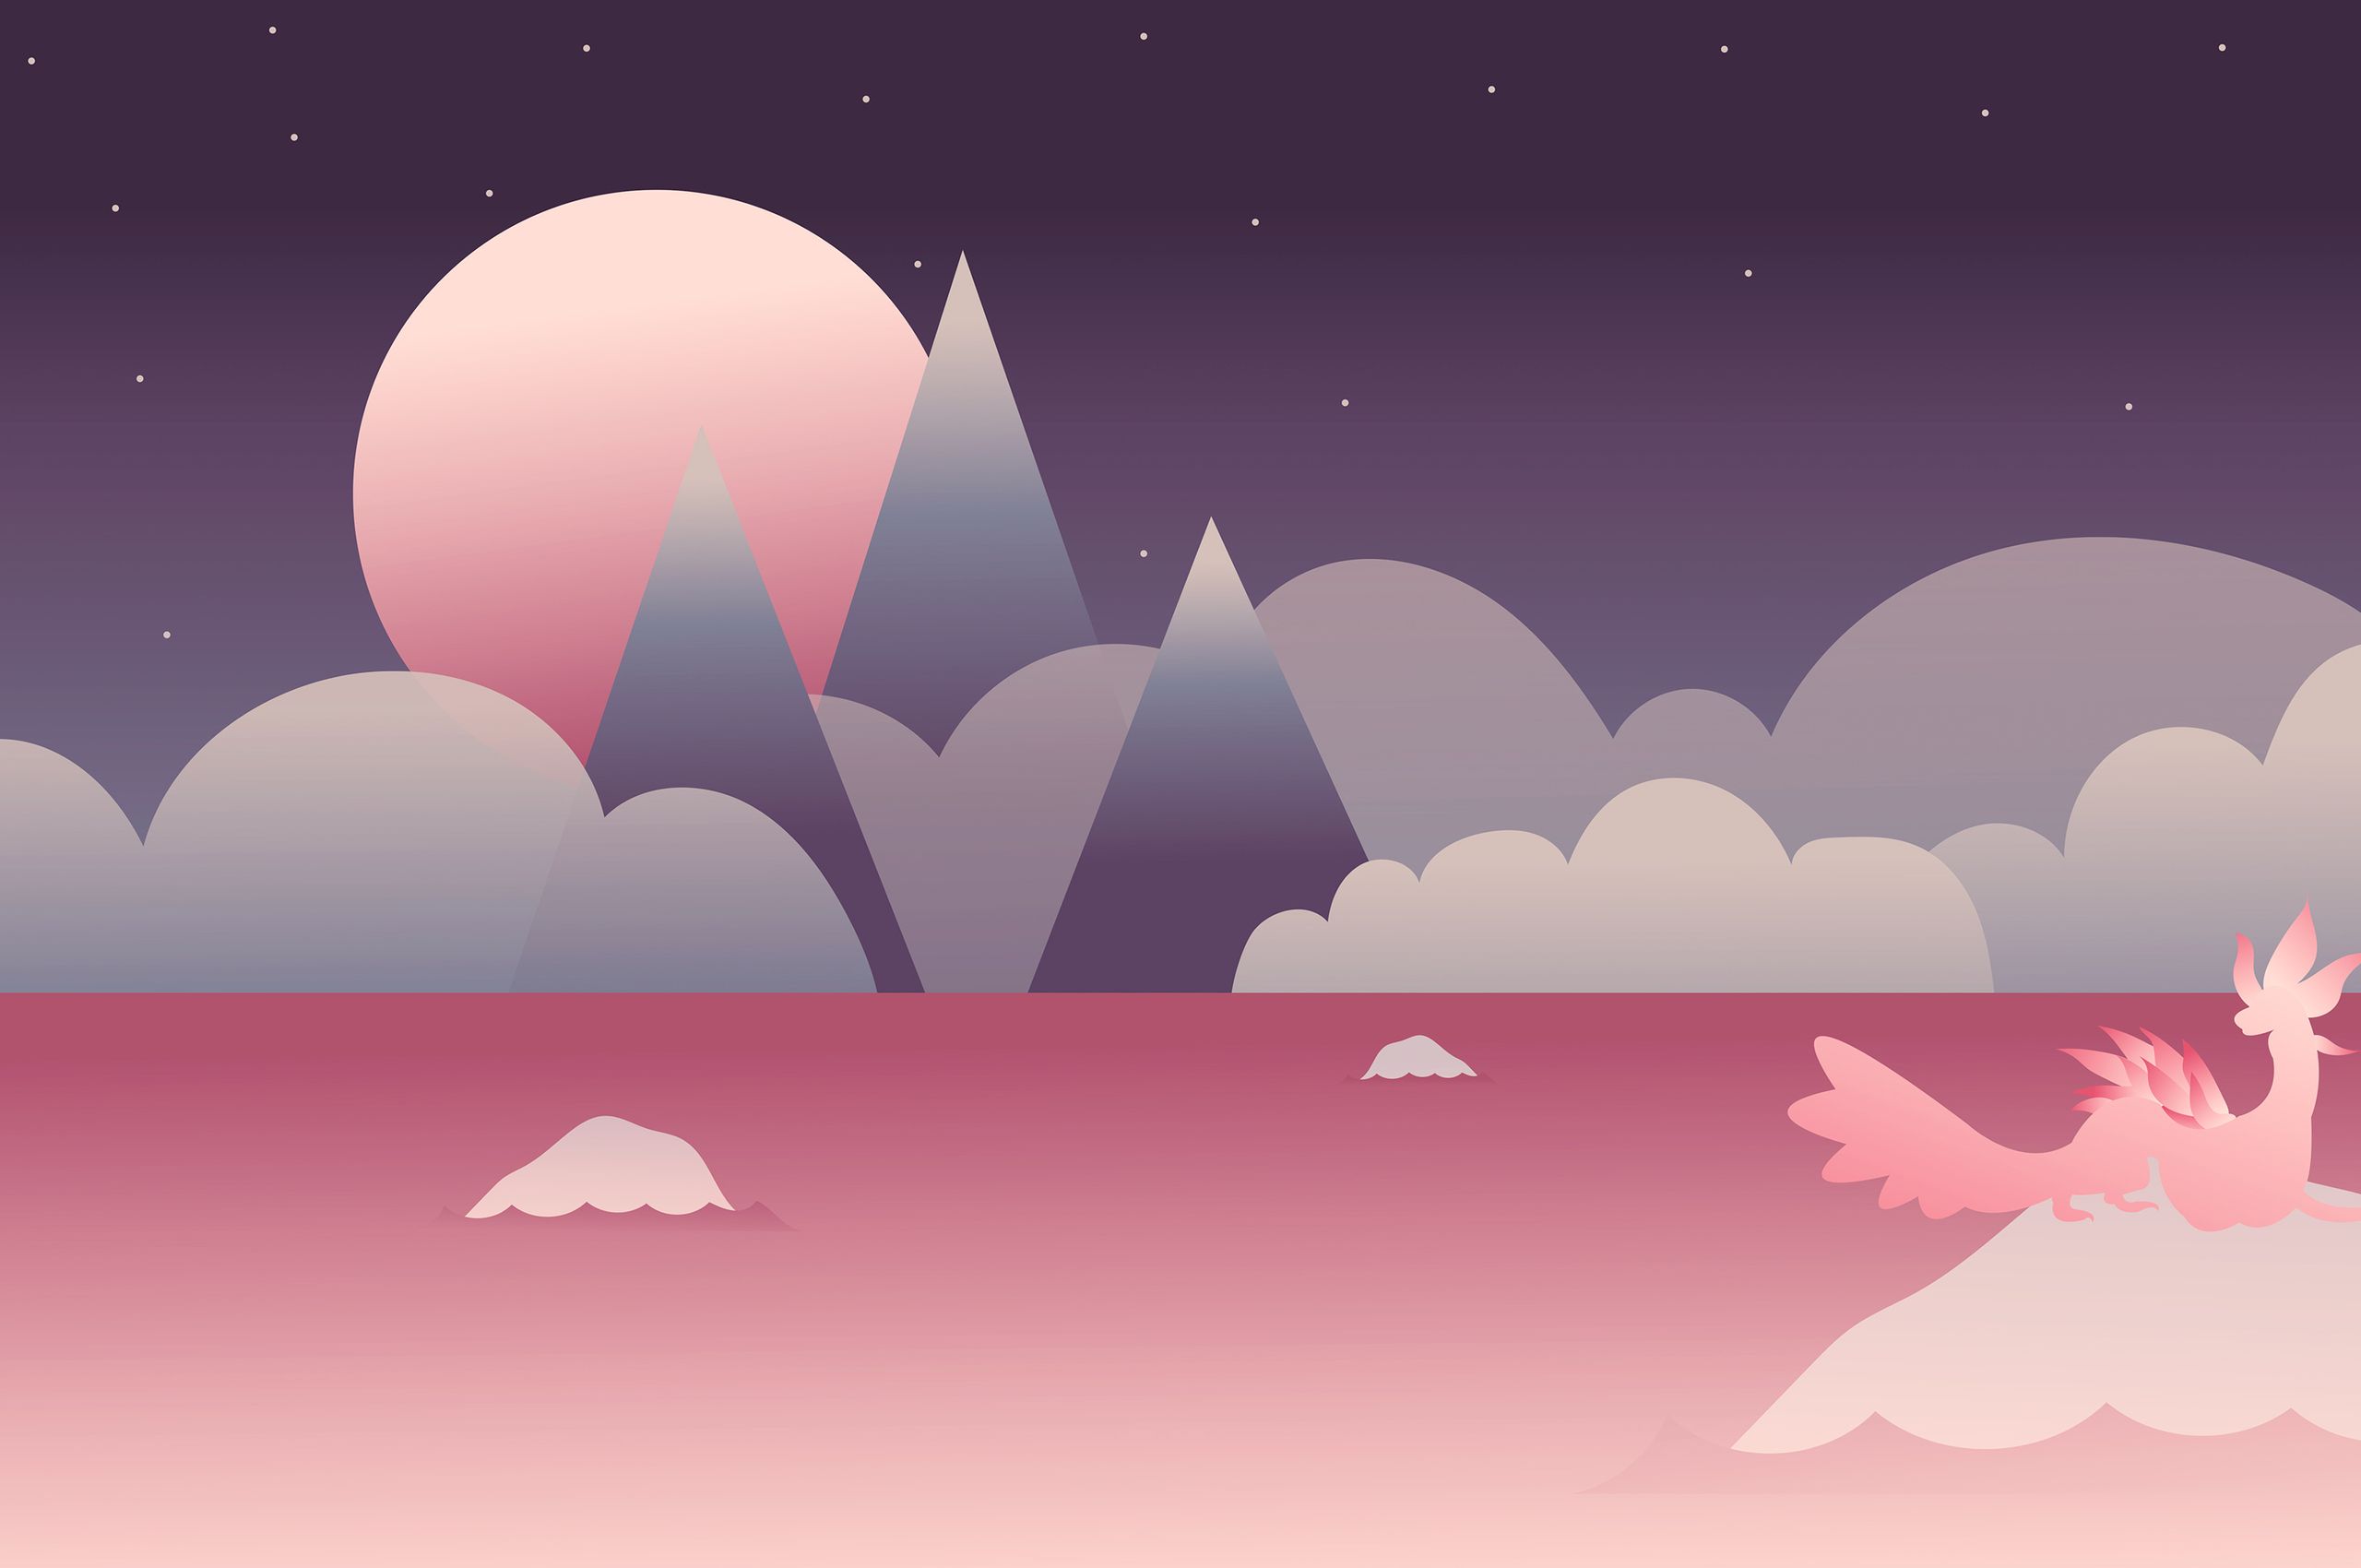 A pink dragon sitting on top of the ground - Chromebook, gradient